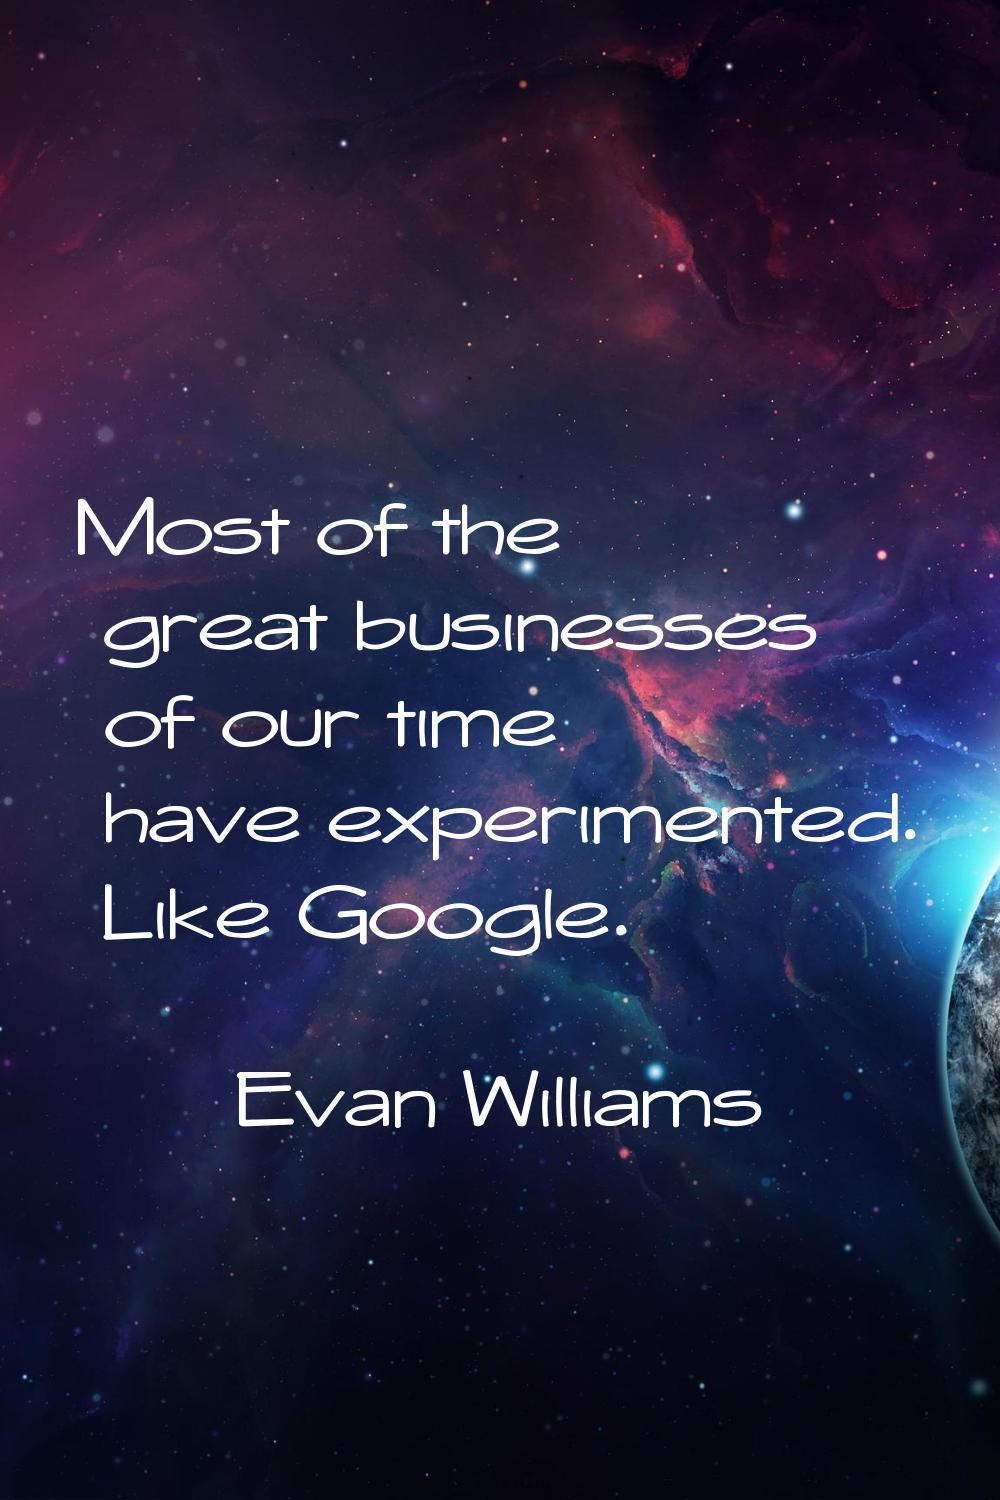 Most of the great businesses of our time have experimented. Like Google.